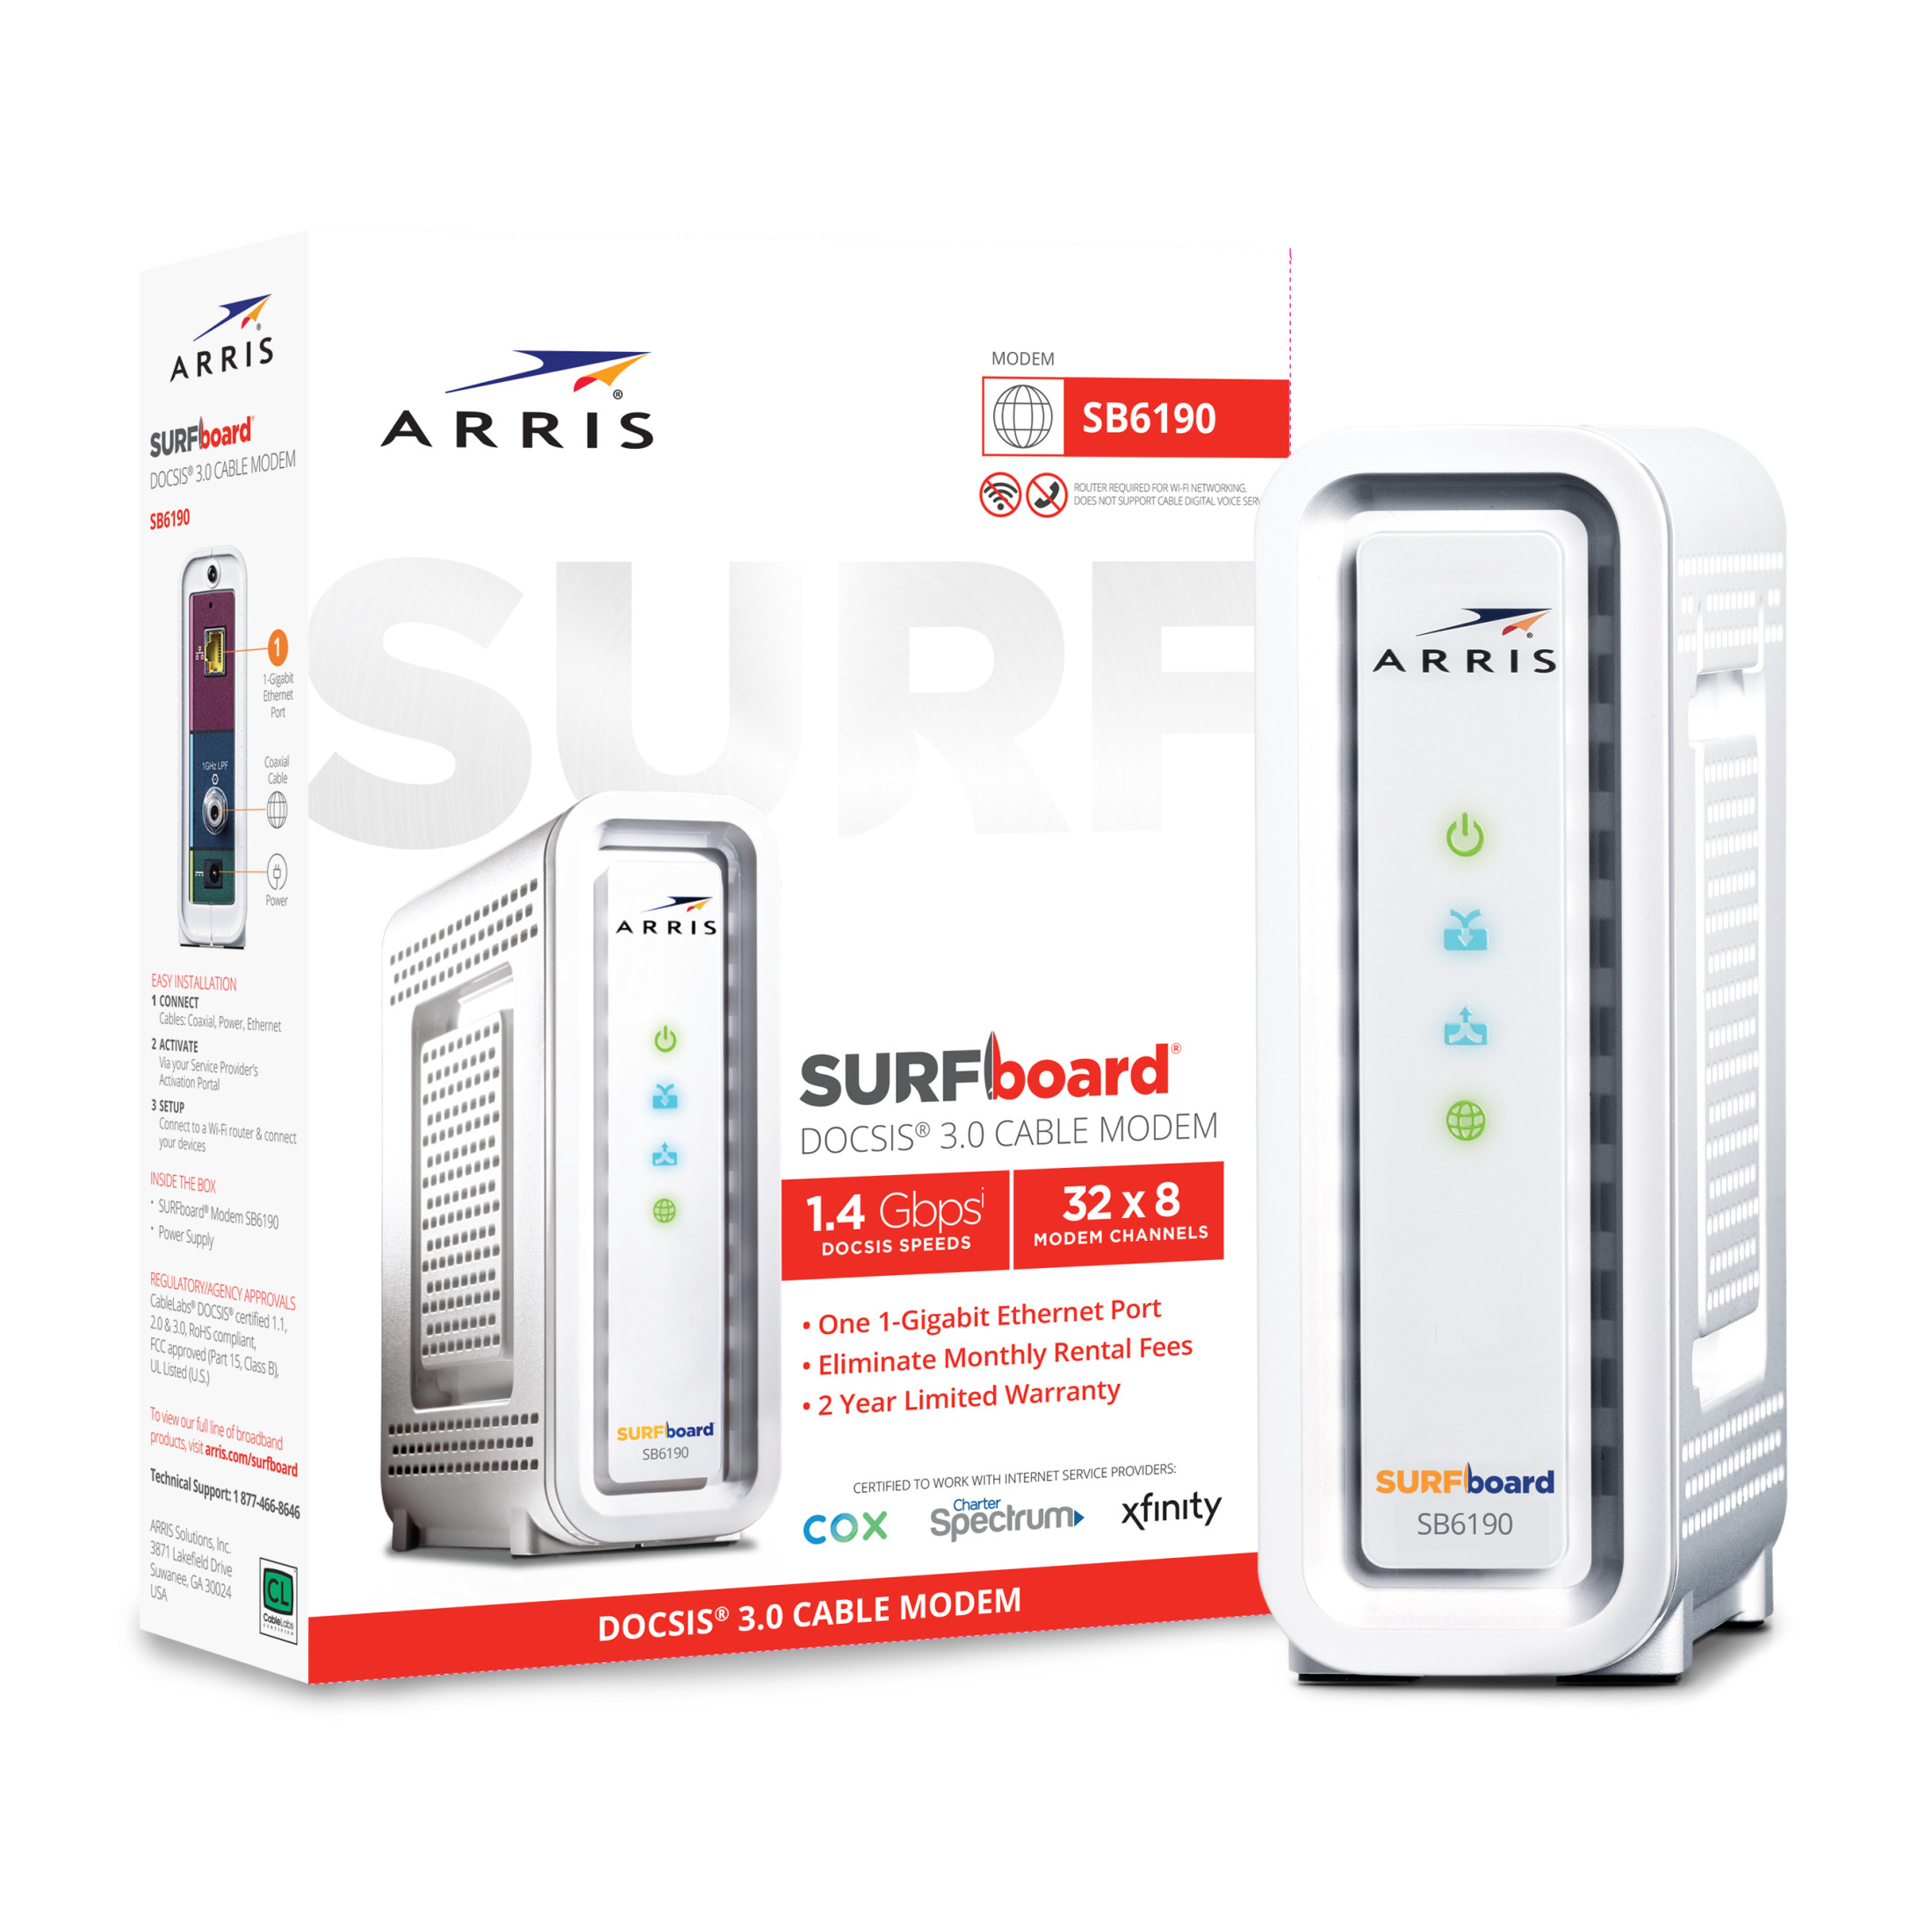 ARRIS Surfboard (32x8) Cable Modem, DOCSIS 3.0 - New Condition - image 3 of 7